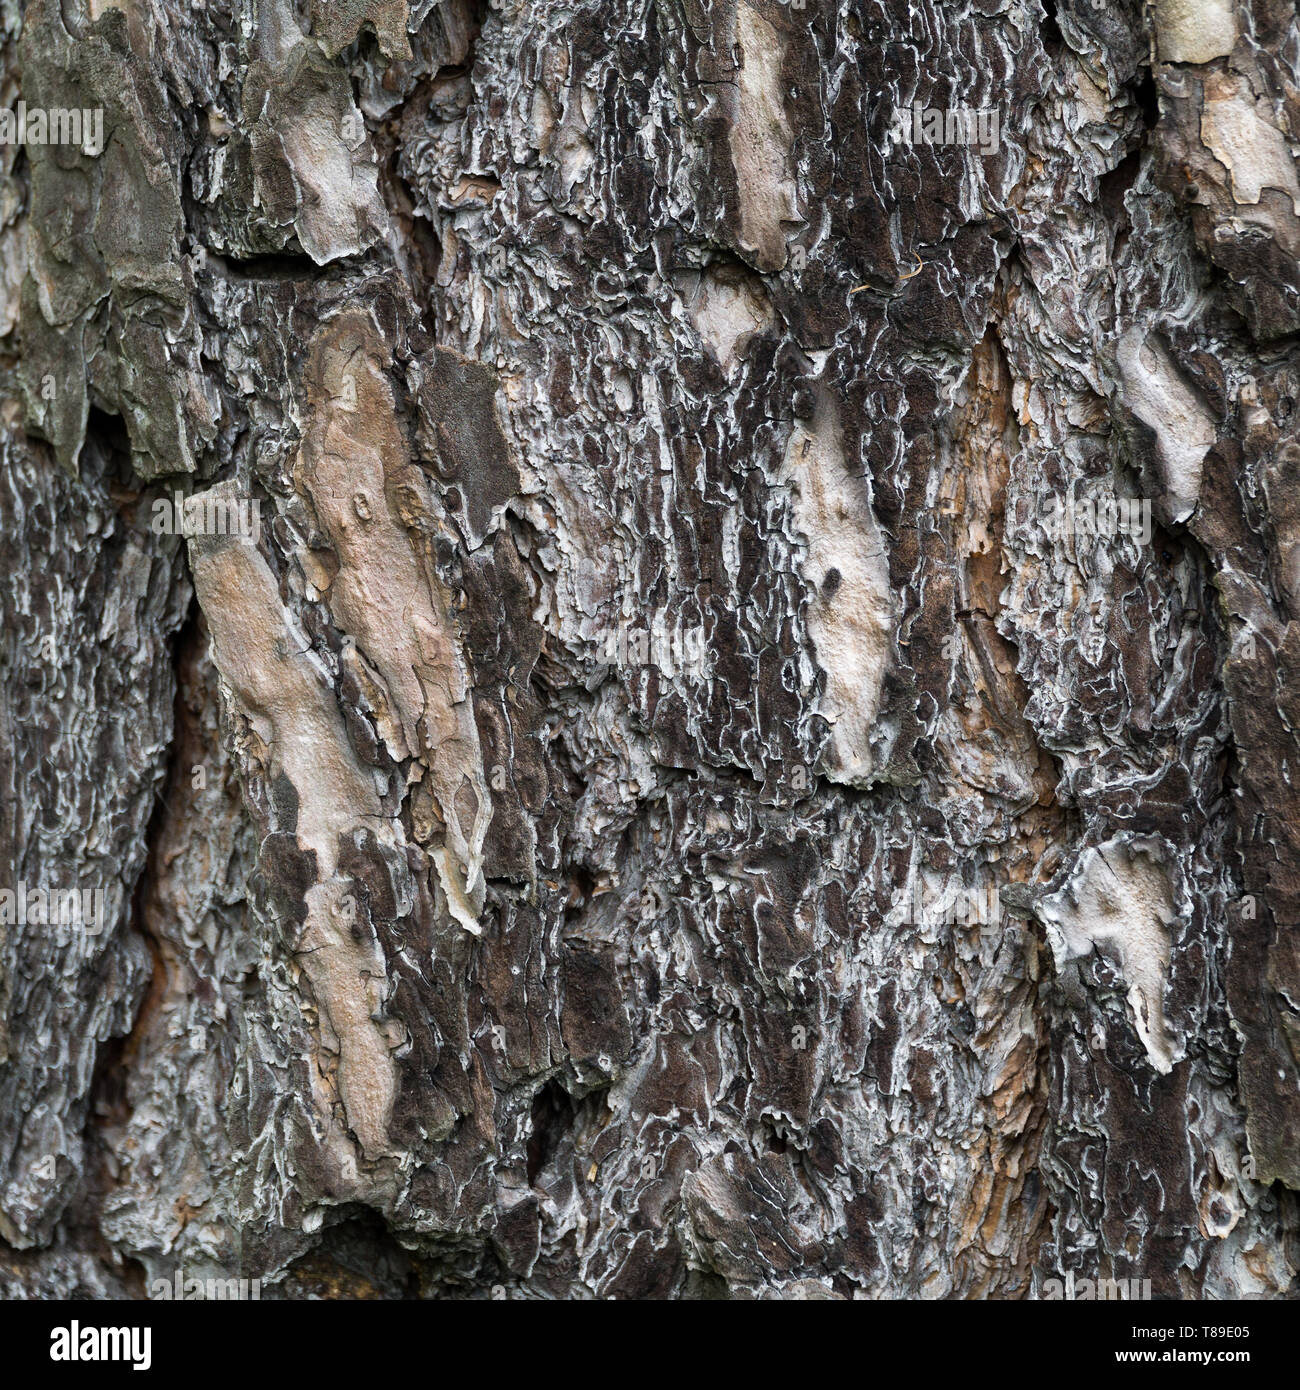 The bark structure of the old oak. Natural material texture or brown background. Stock Photo